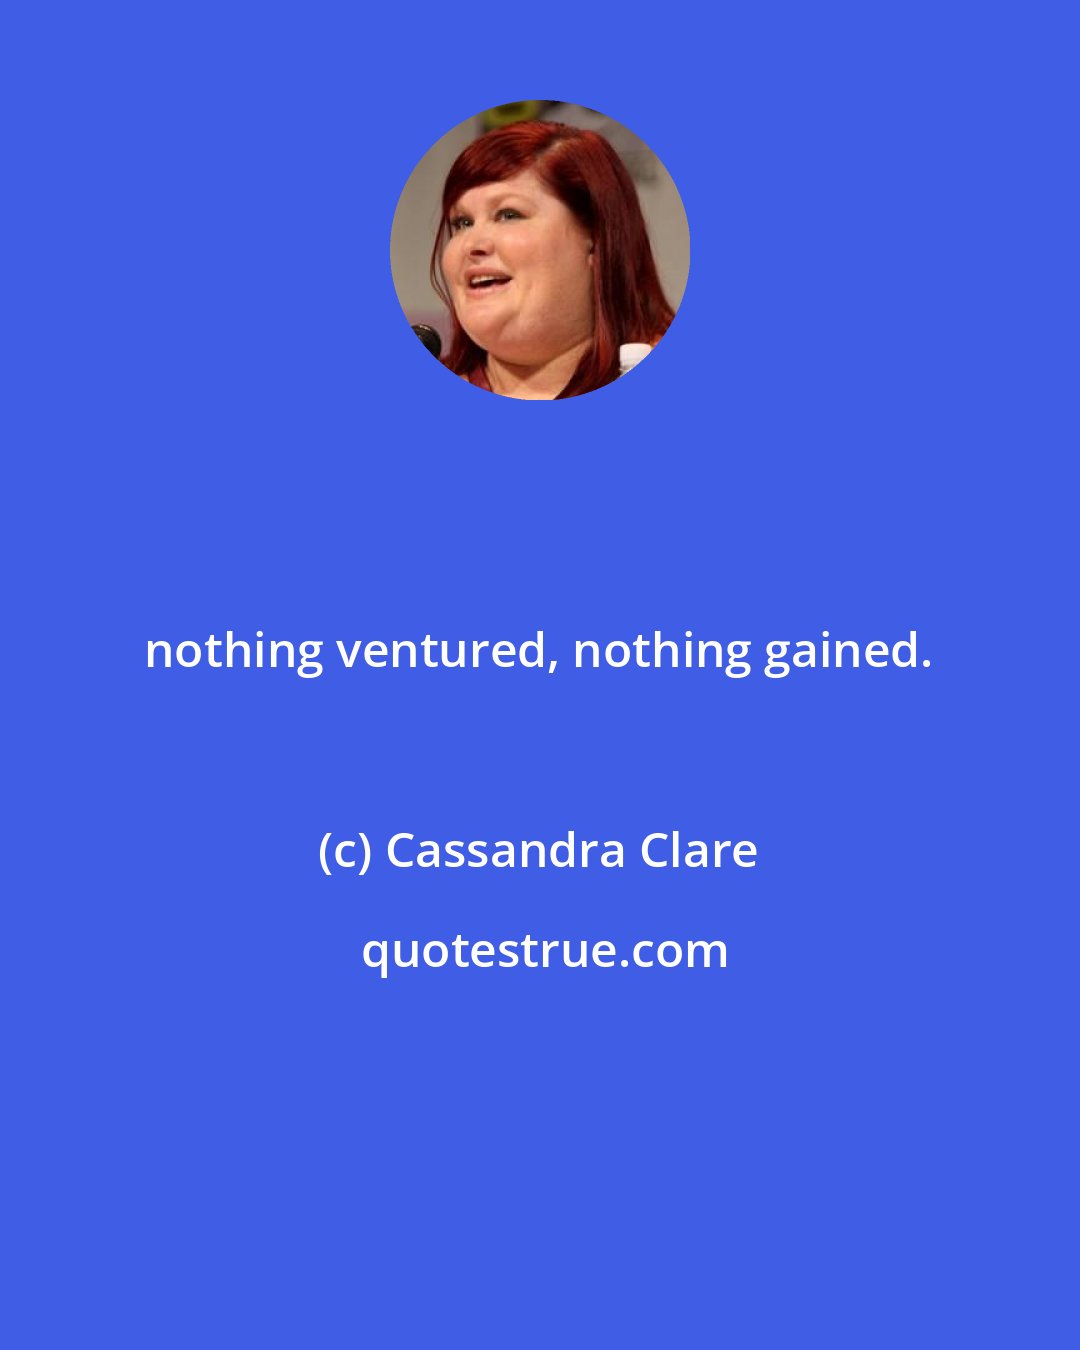 Cassandra Clare: nothing ventured, nothing gained.